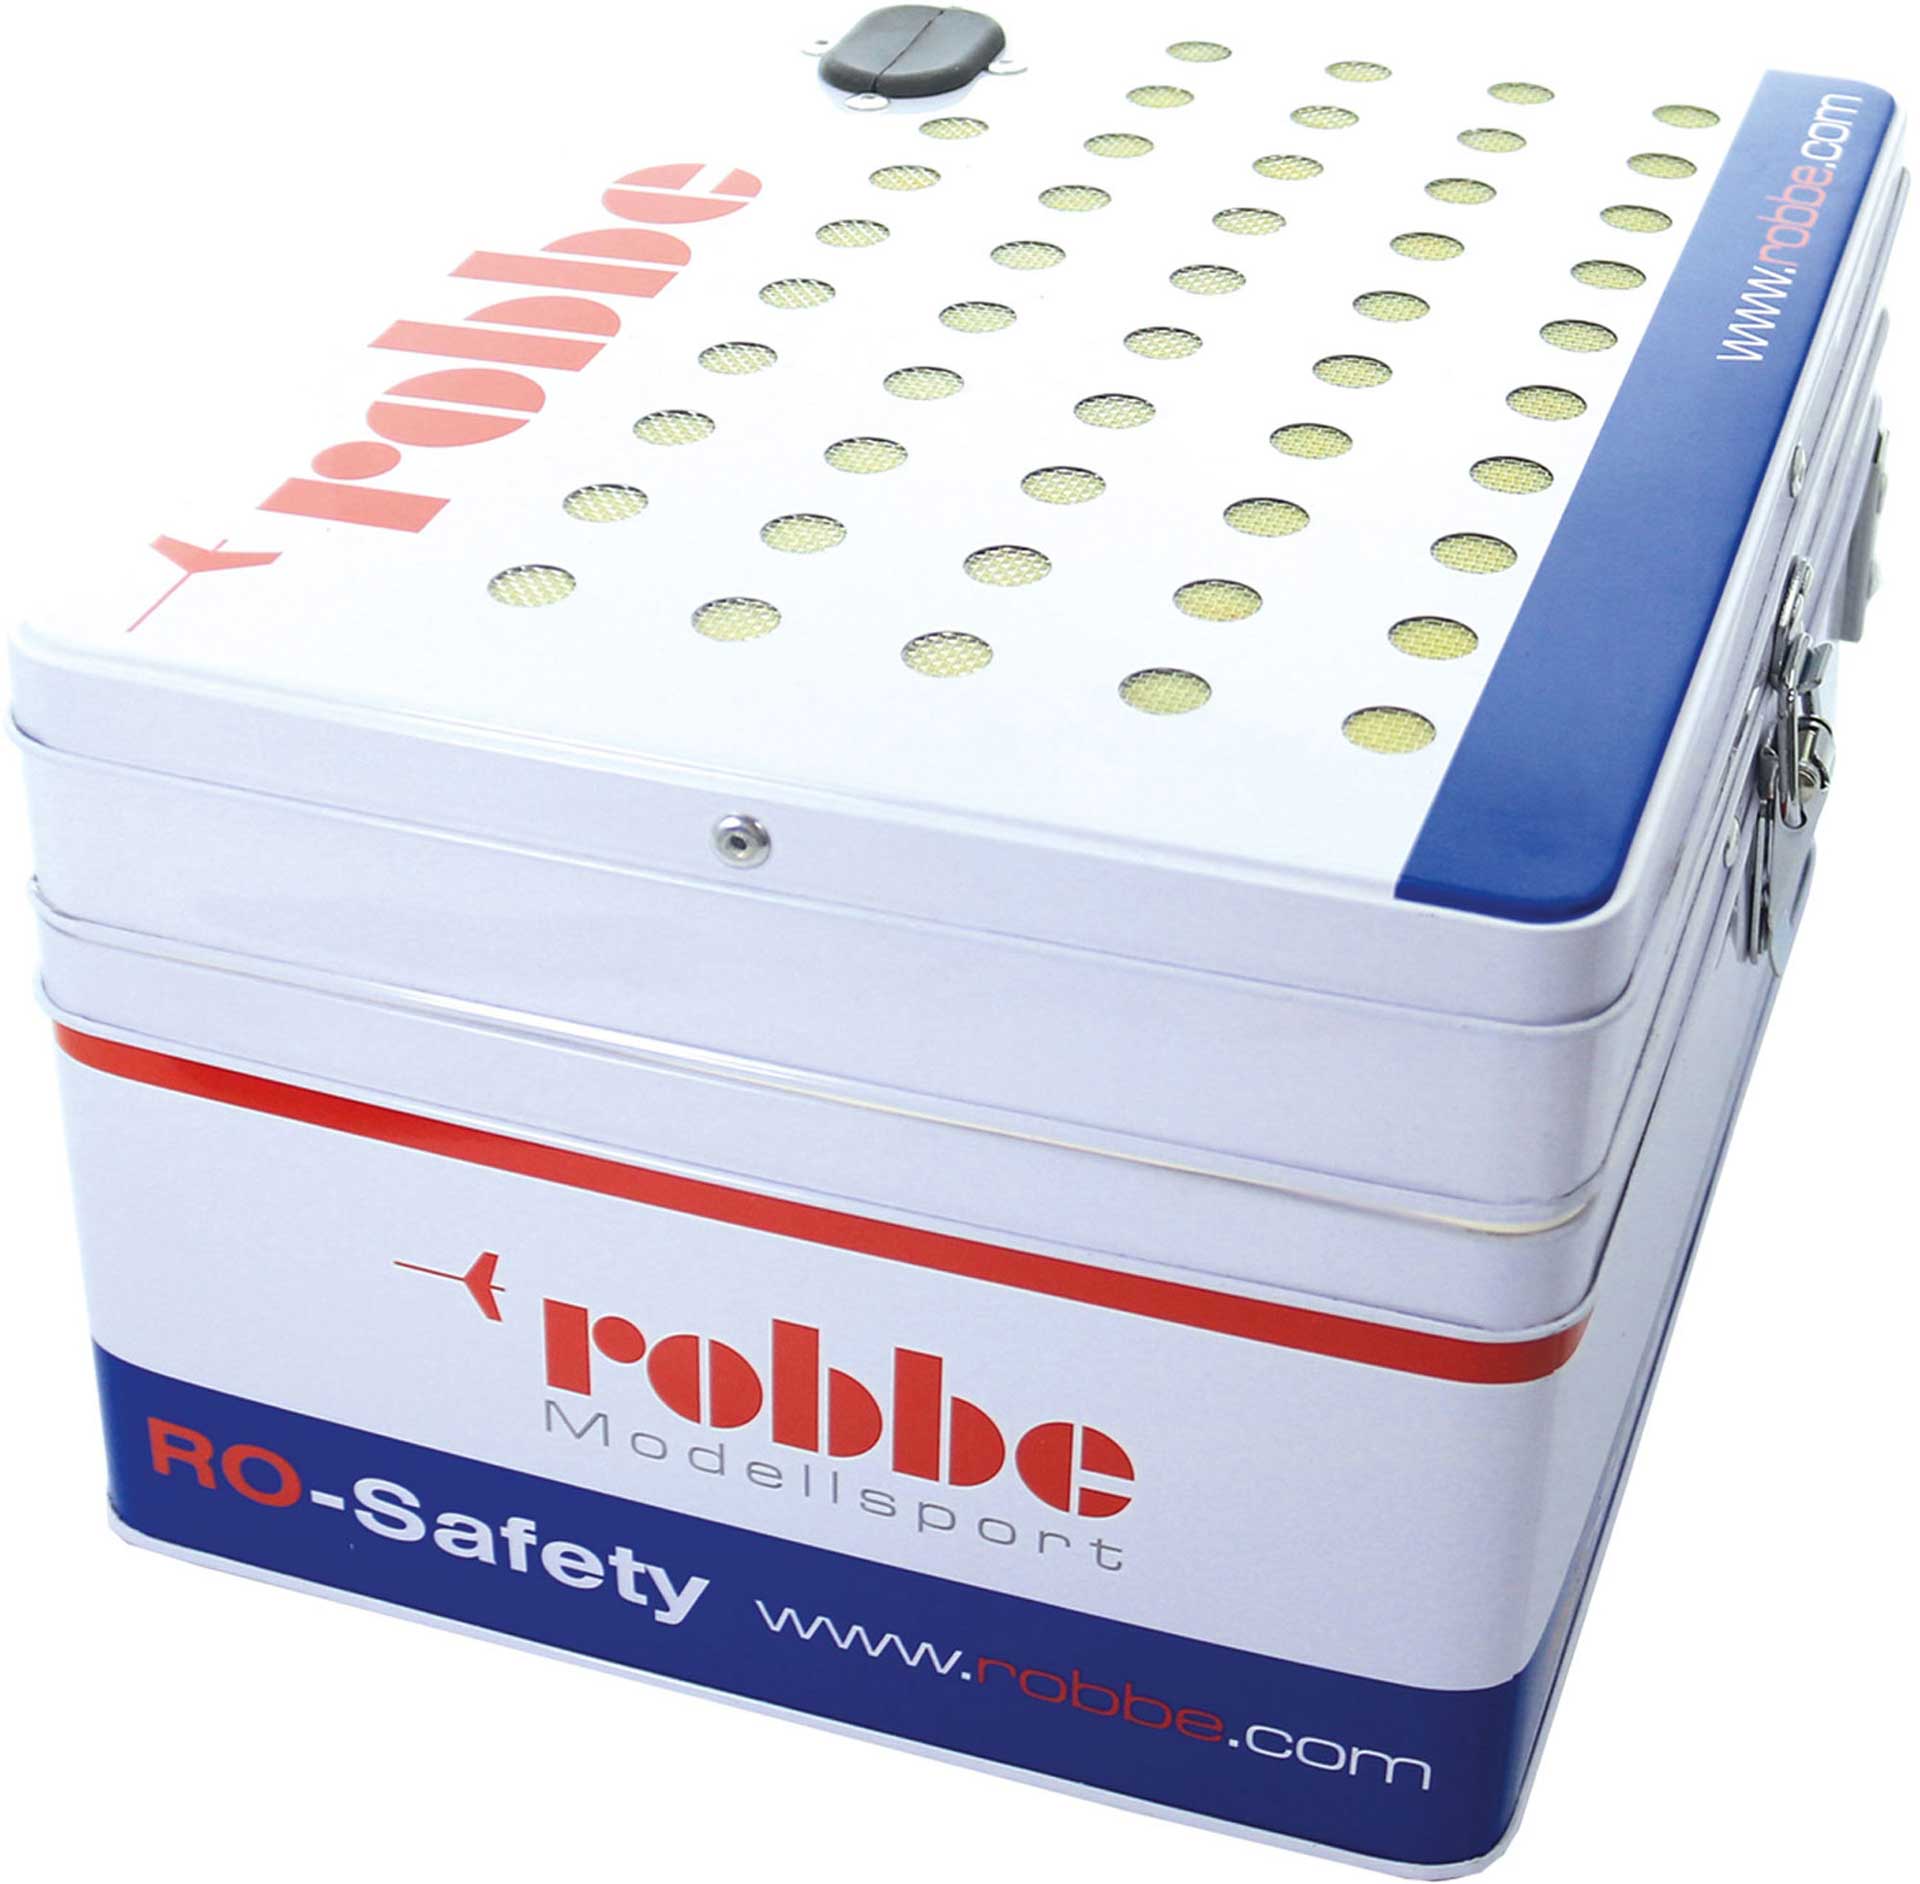 Robbe Modellsport RO-SAFETY LIPO SAFE TRANSPORT AND CHARGING CASE FOR LIPO BATTERY